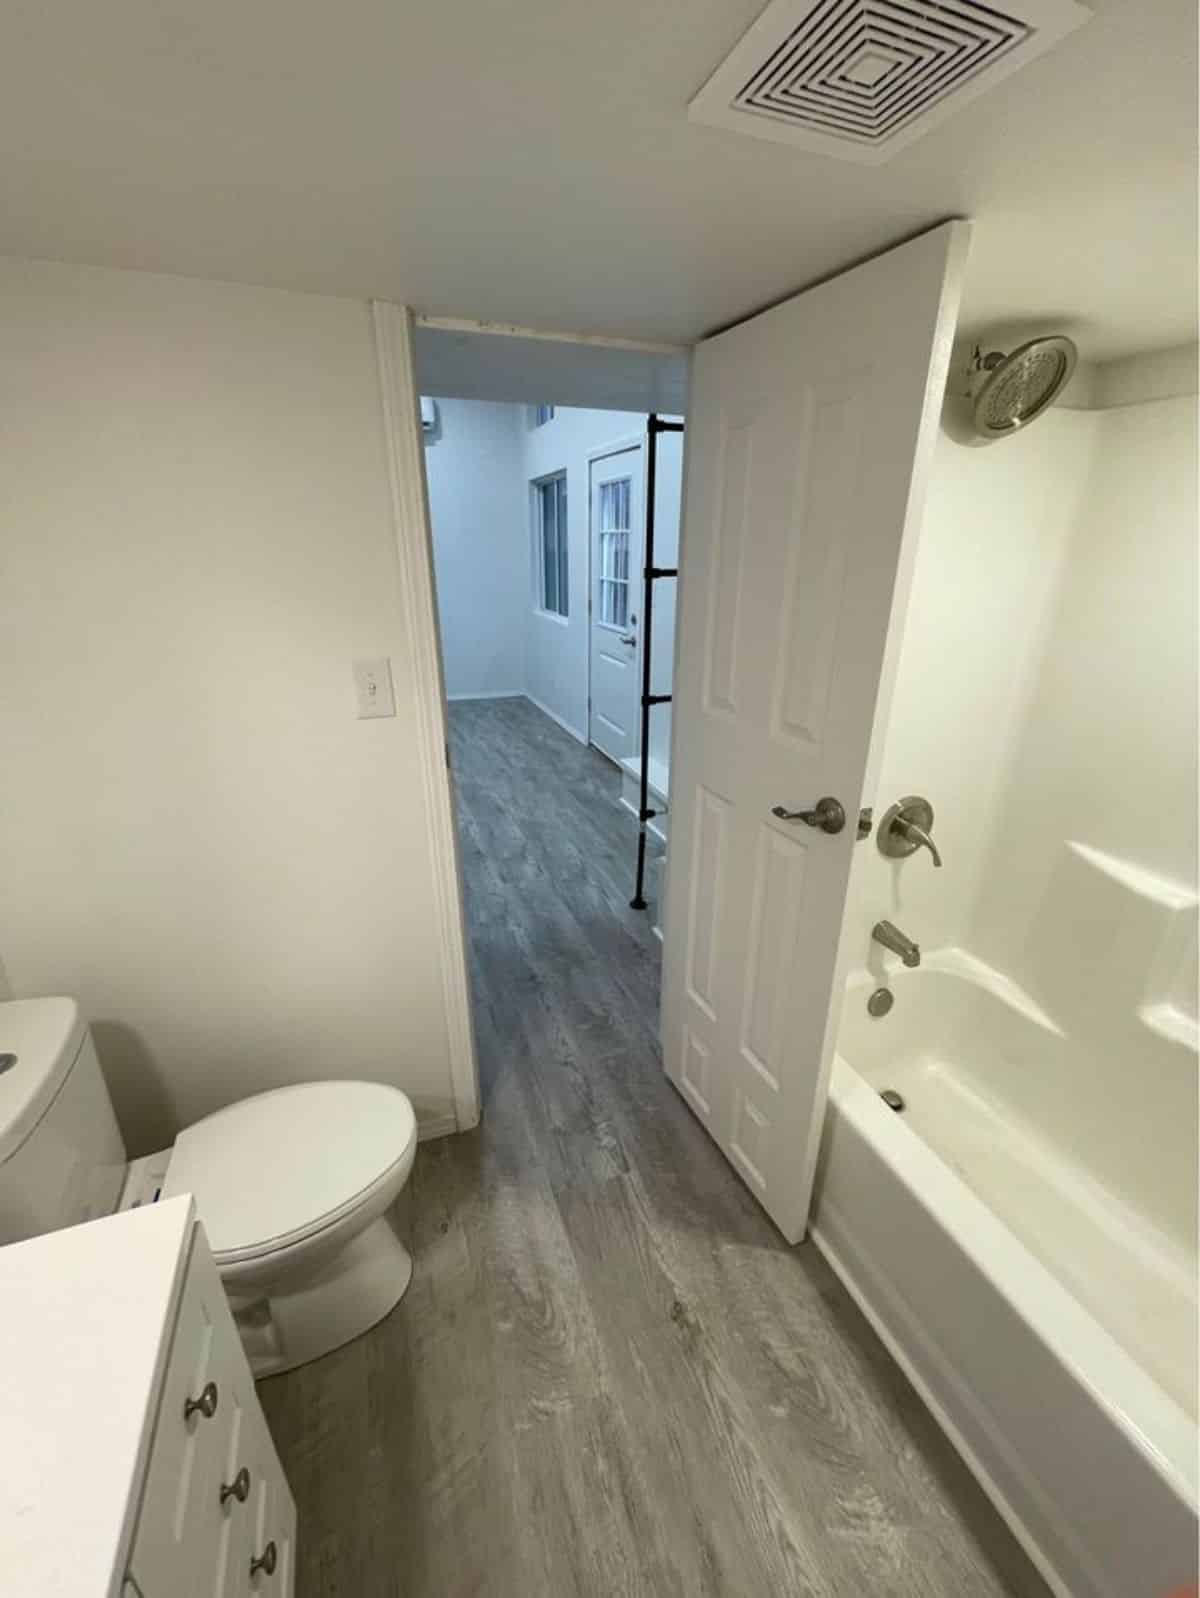 standard toilet and bathtub in bathroom of 24’ modern tiny home